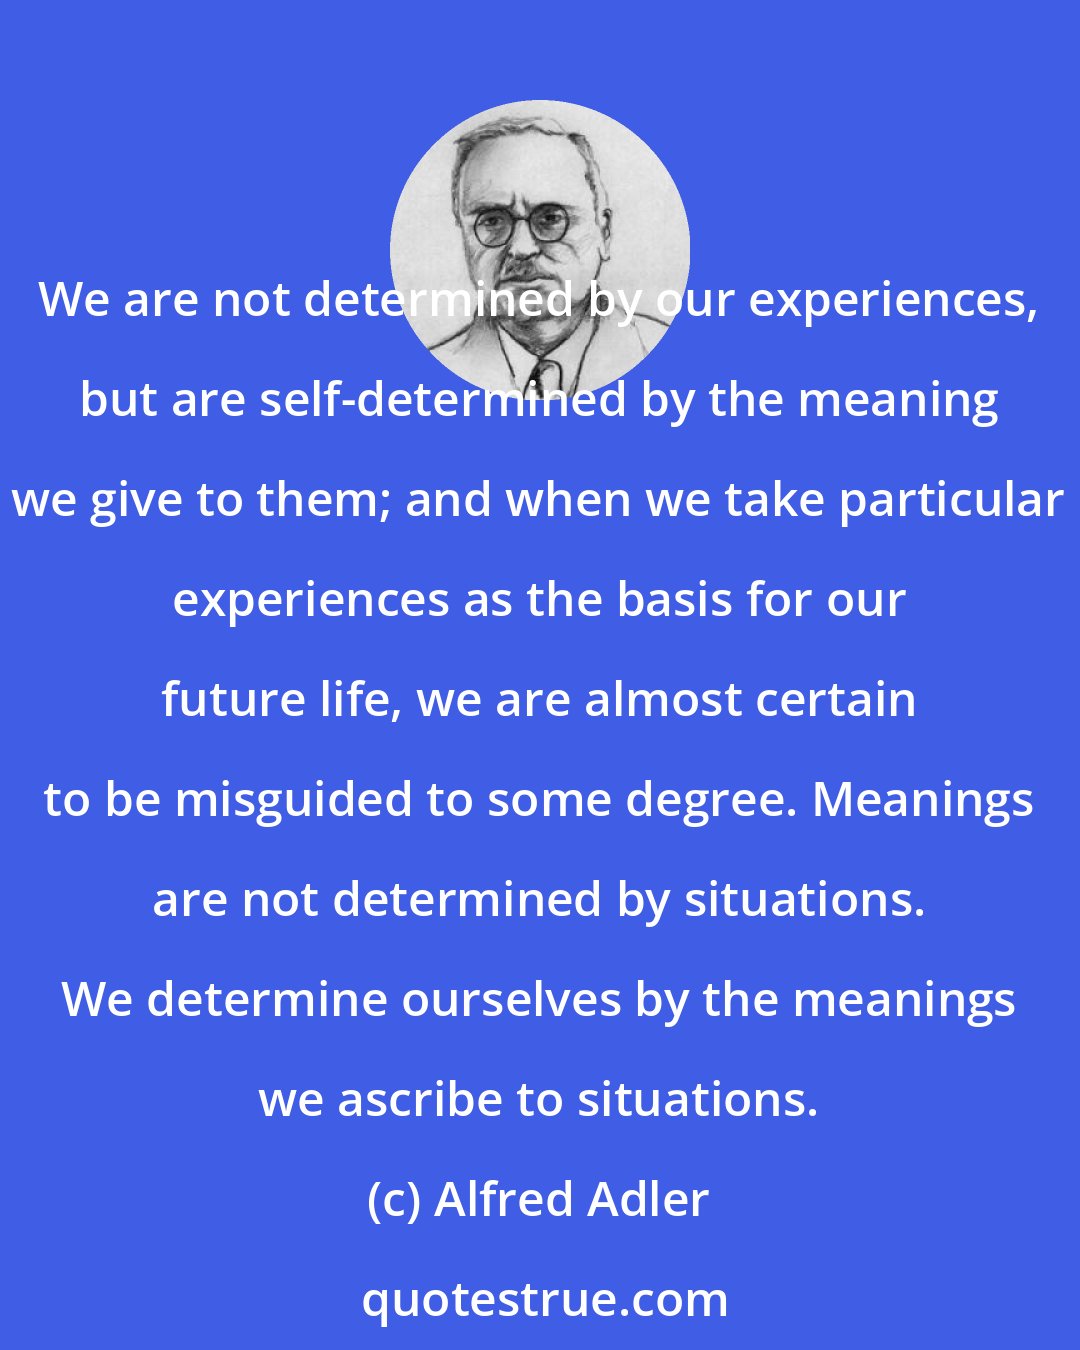 Alfred Adler: We are not determined by our experiences, but are self-determined by the meaning we give to them; and when we take particular experiences as the basis for our future life, we are almost certain to be misguided to some degree. Meanings are not determined by situations. We determine ourselves by the meanings we ascribe to situations.